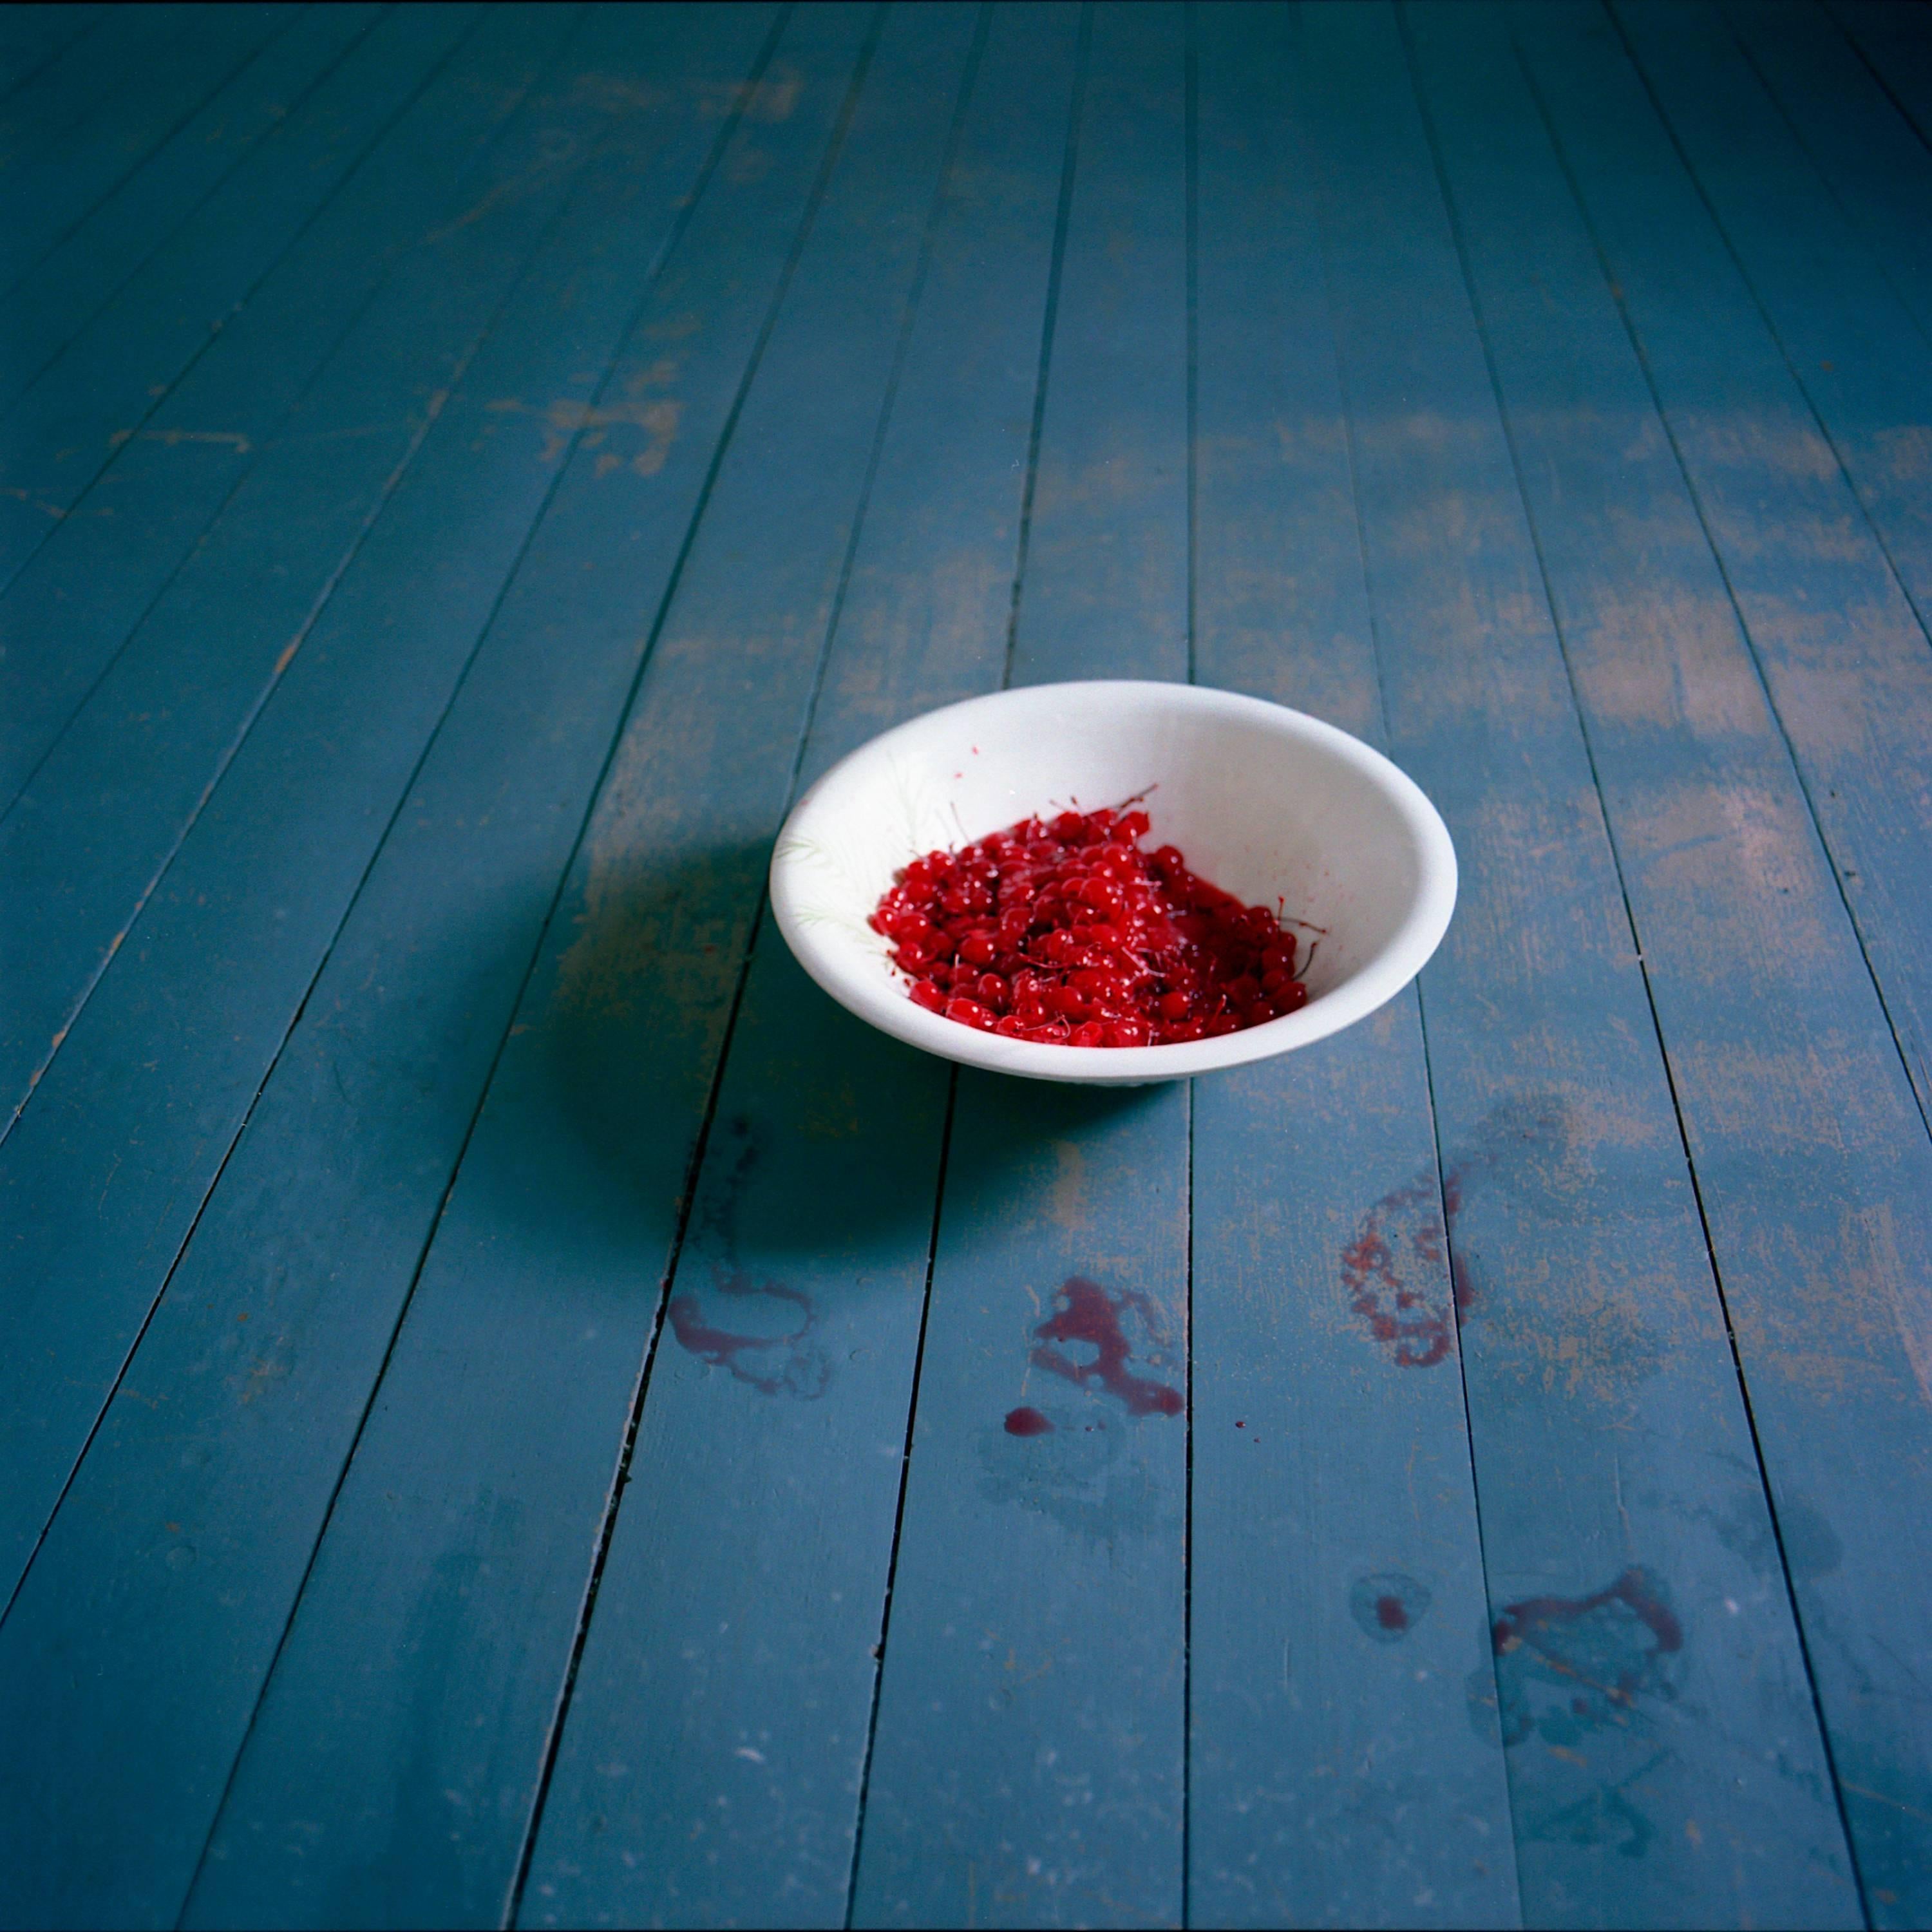 Bowl of Cherries, Rockport, Maine, 2007 - Cig Harvey (Colour Photography)
Signed and numbered on reverse
Digital c-type print

Available in three sizes:
14 x 14 inches, edition of 10
28 x 28 inches, edition of 7
40 x 40 inches, edition of